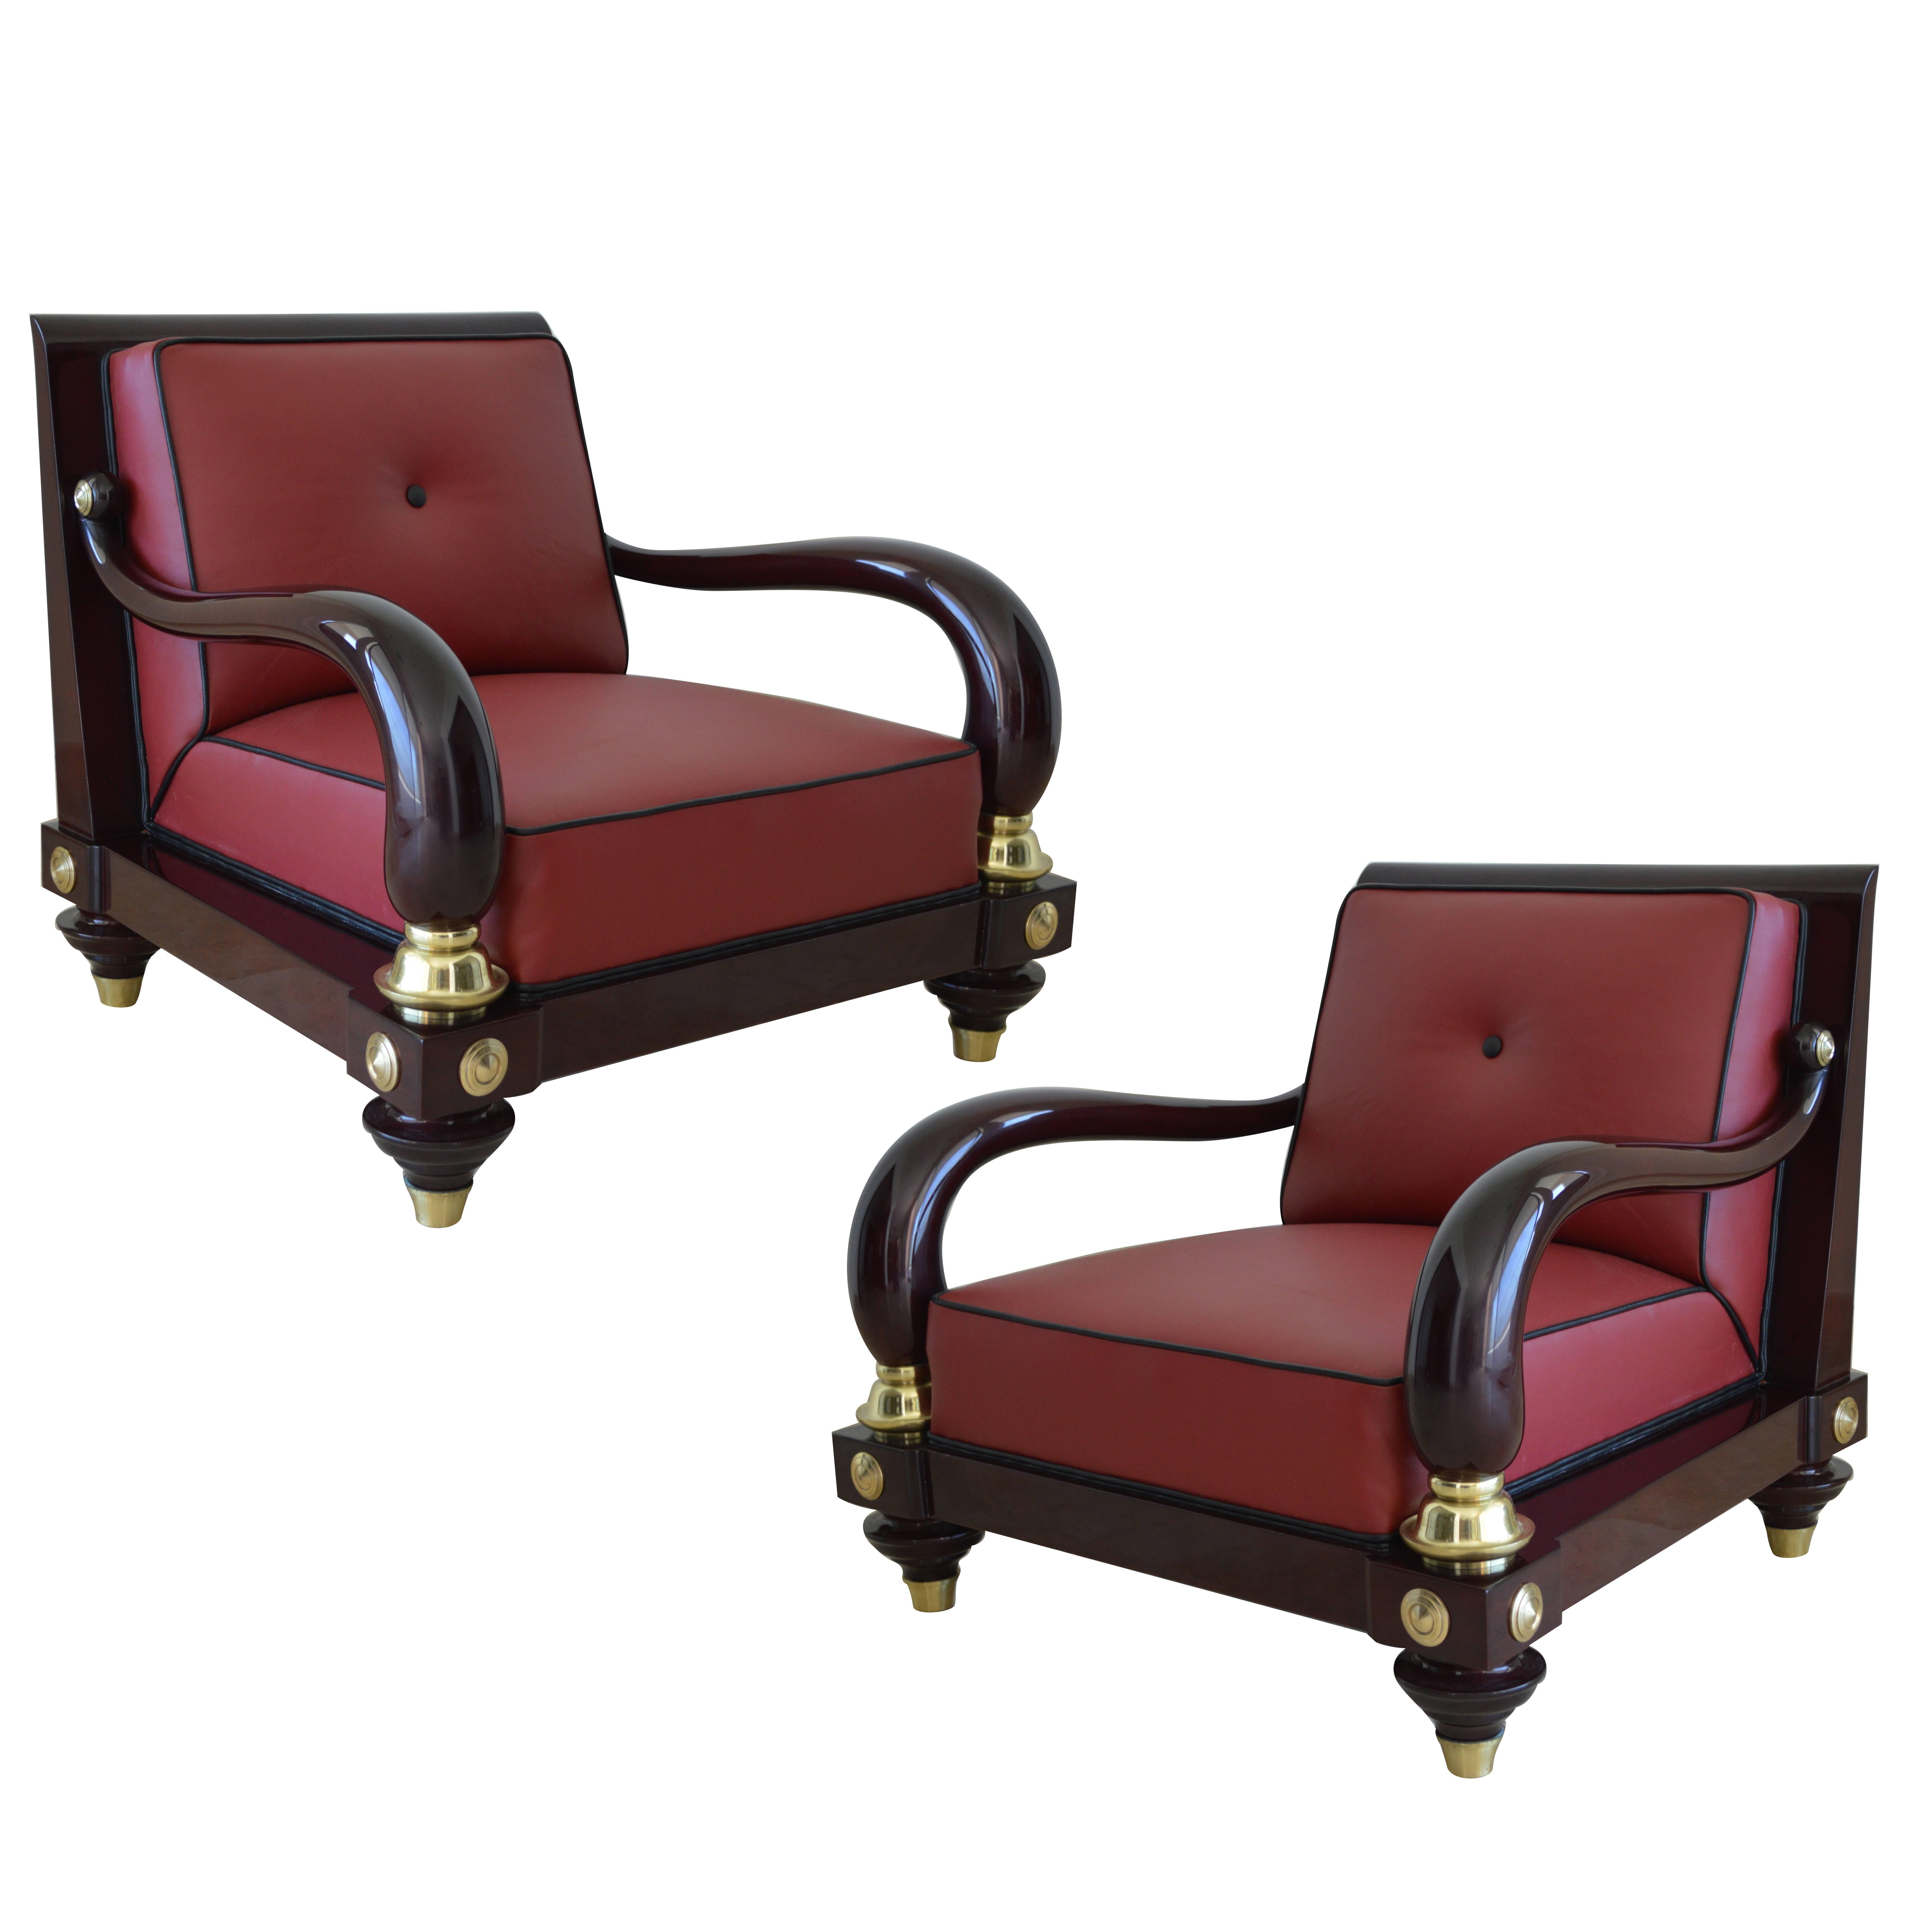 Rare 1950s Octavio Vidales Sculptural Chairs in Lacquered Mahogany and Leather For Sale